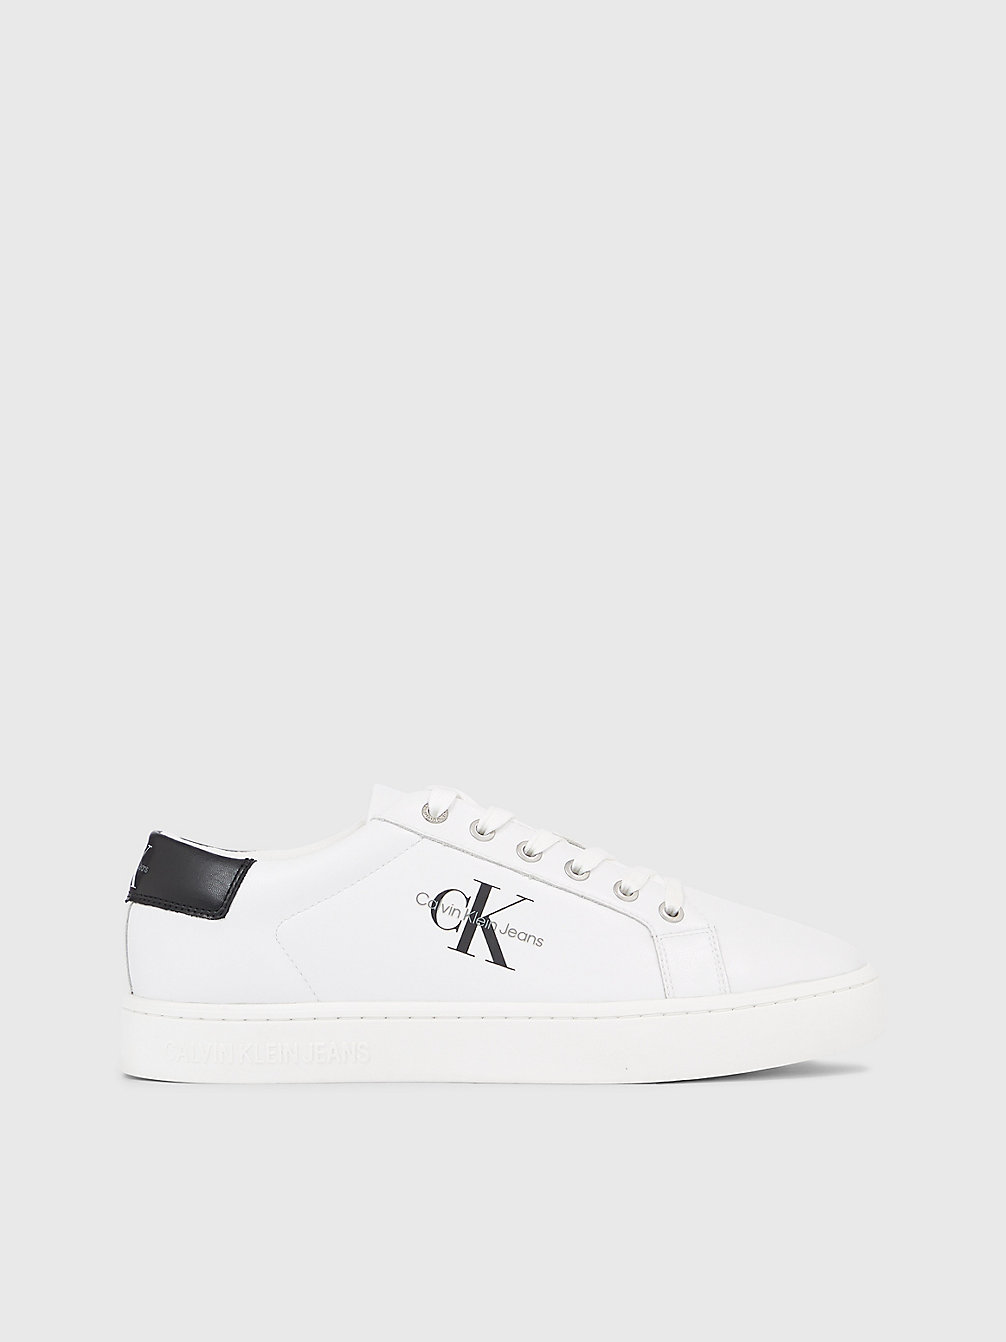 BRIGHT WHITE / BLACK Recycled Leather Trainers undefined men Calvin Klein